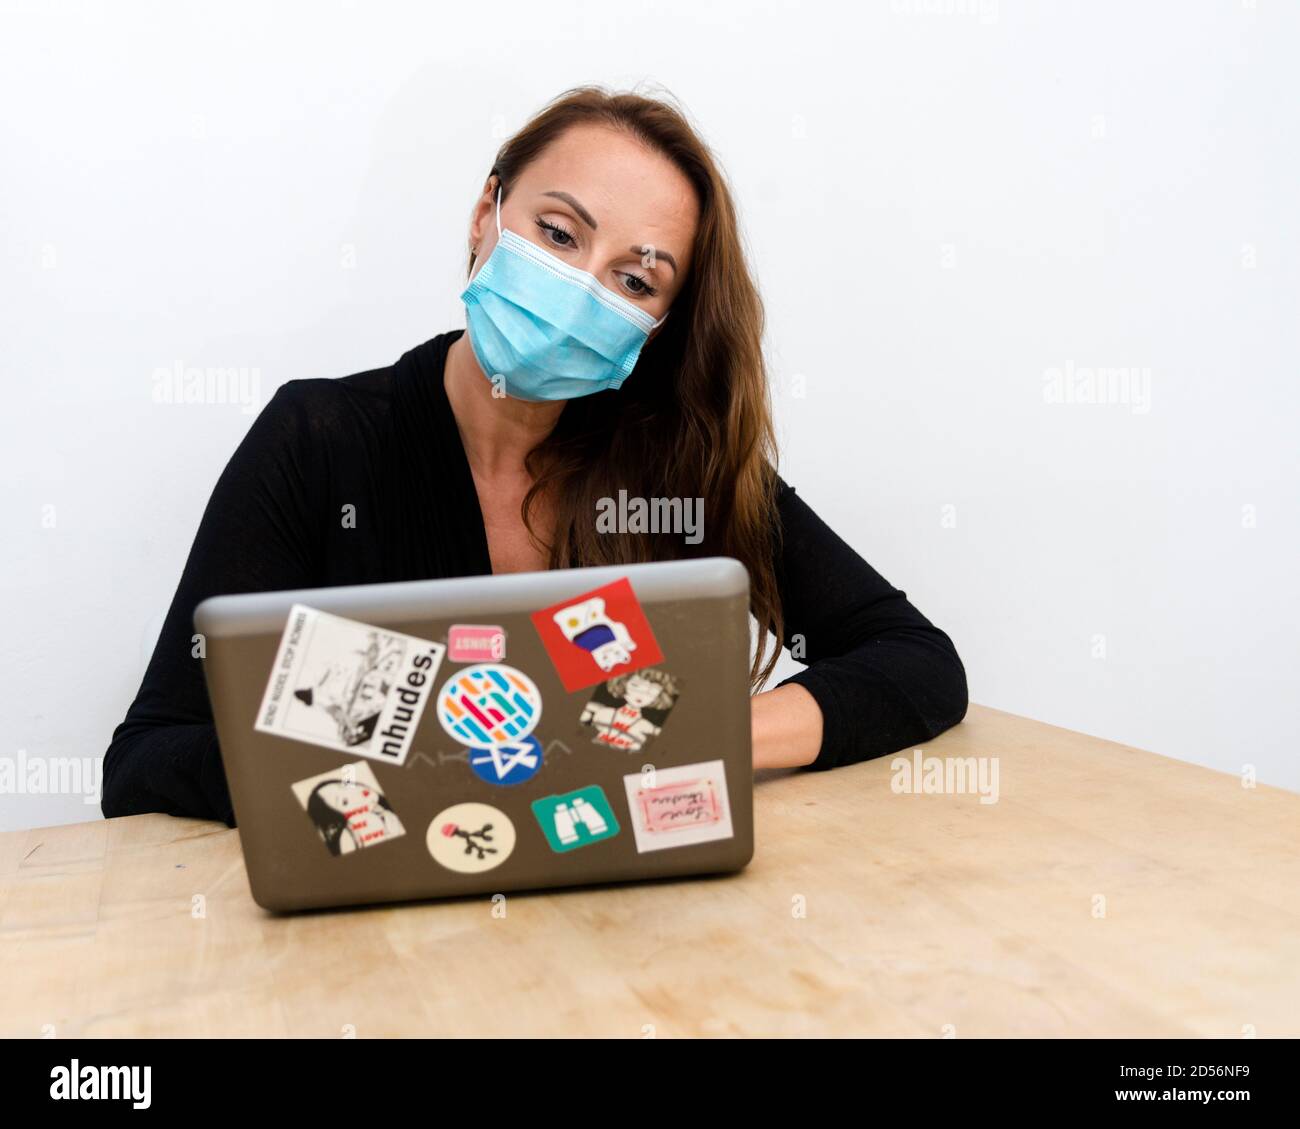 Woman working on a laptop while wearing a protective face mask Stock Photo